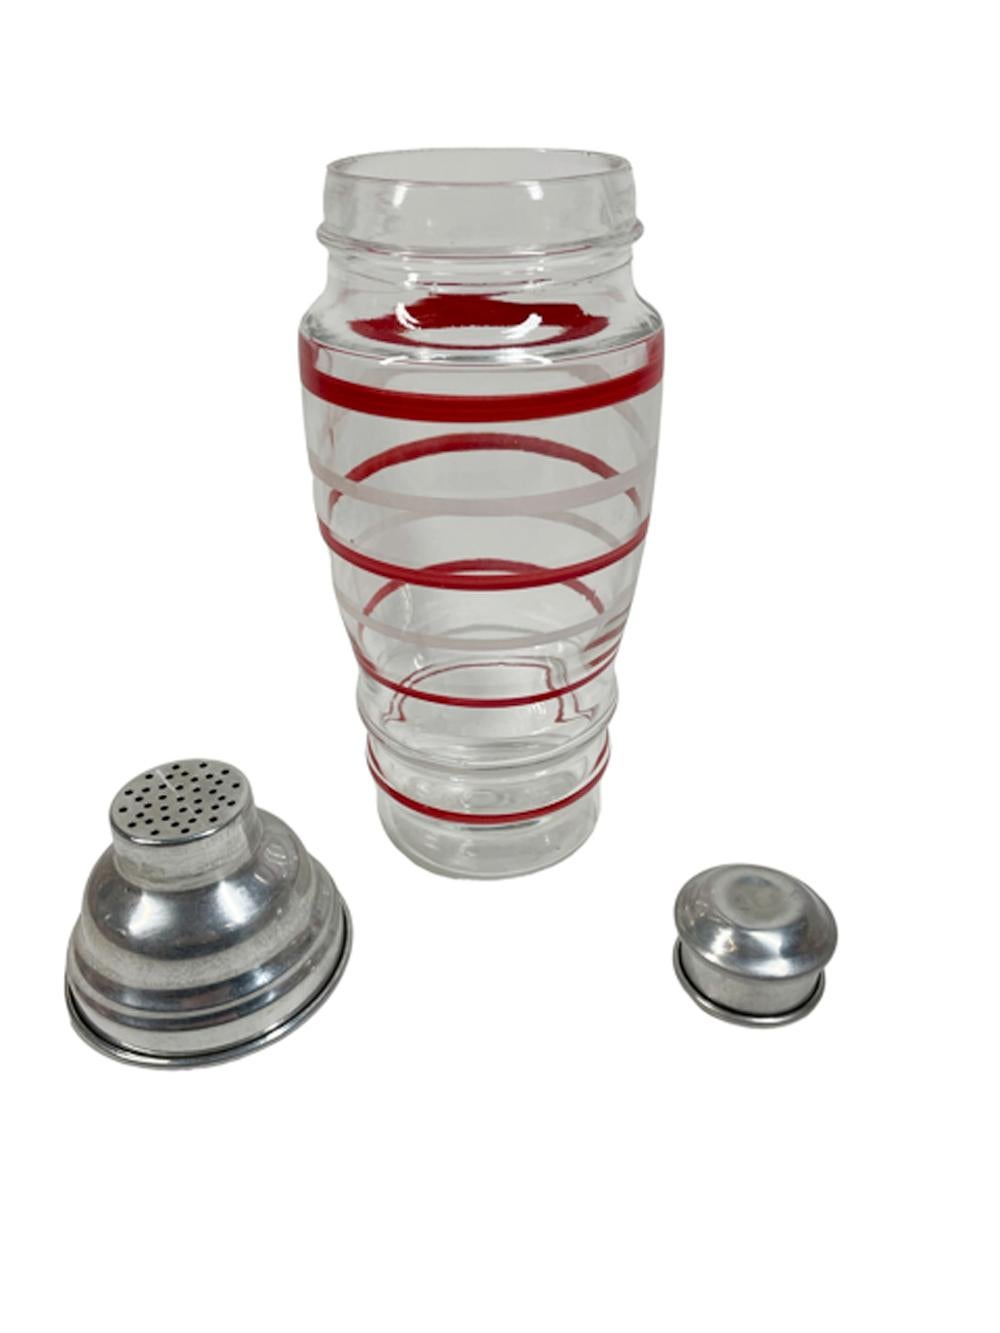 15 Piece Hand Painted Art Deco Cocktail Shaker Set with Red and White Bands For Sale 1